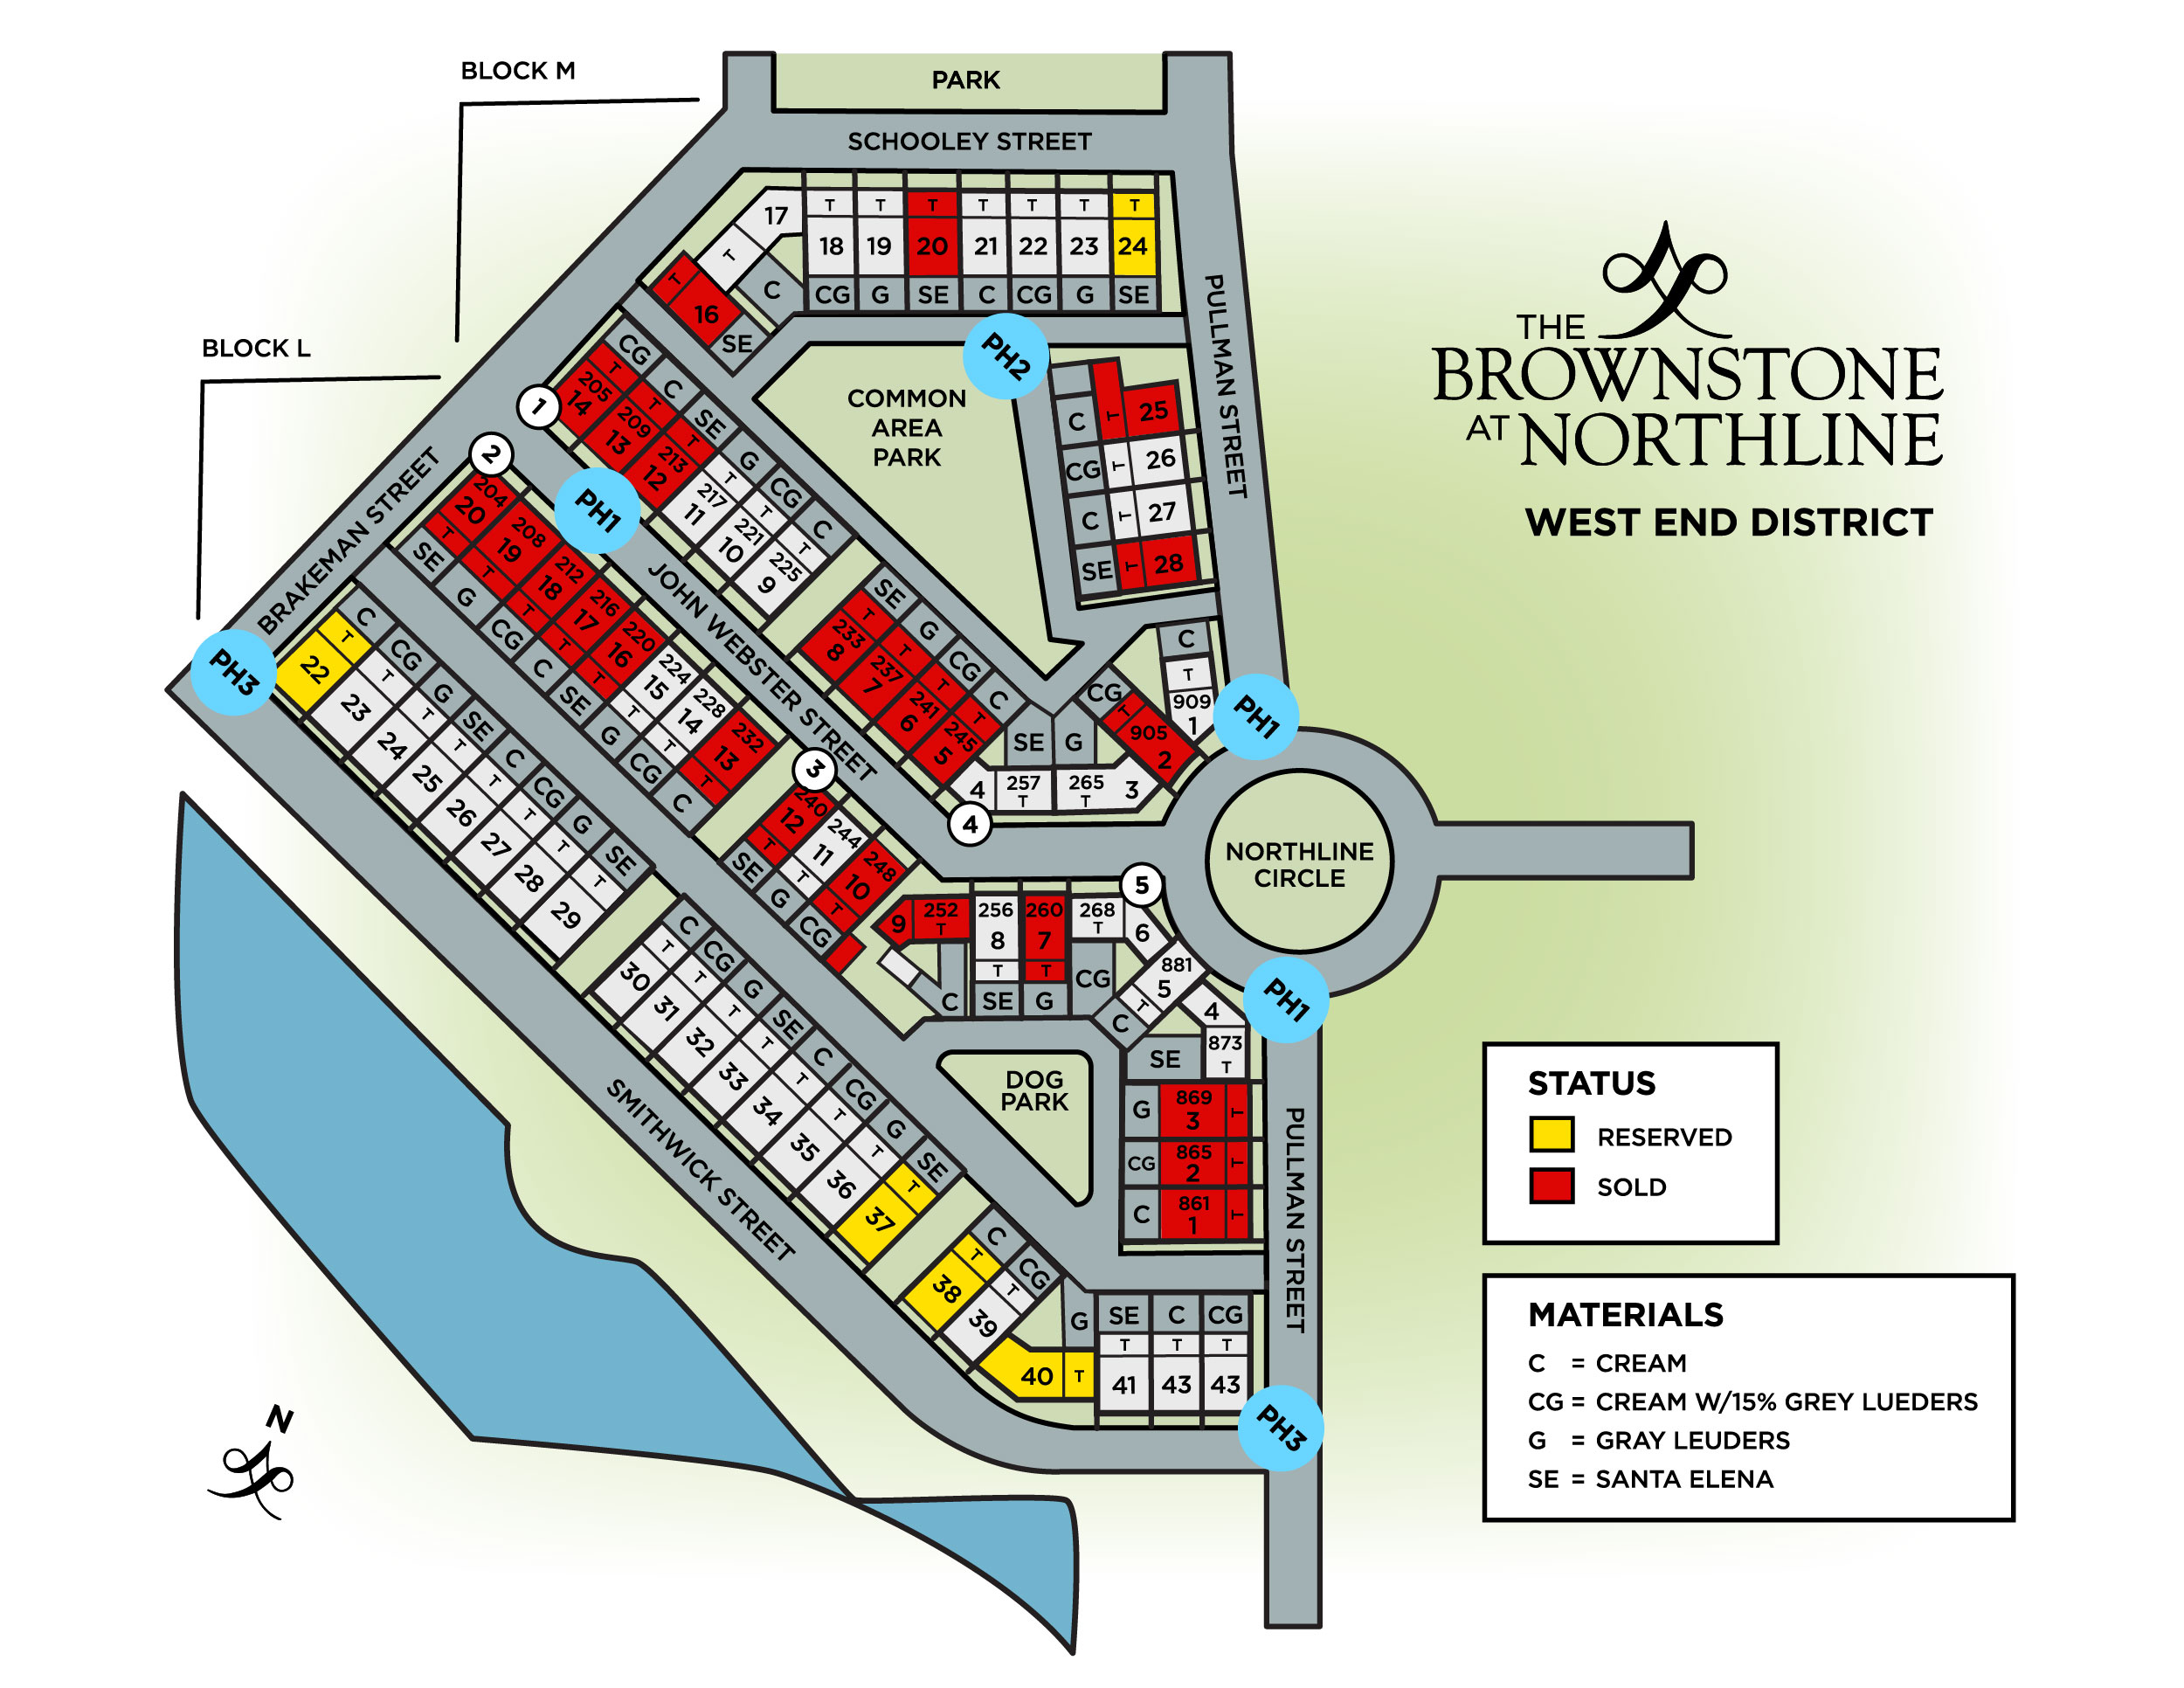 The Brownstone at Northline Master Plan